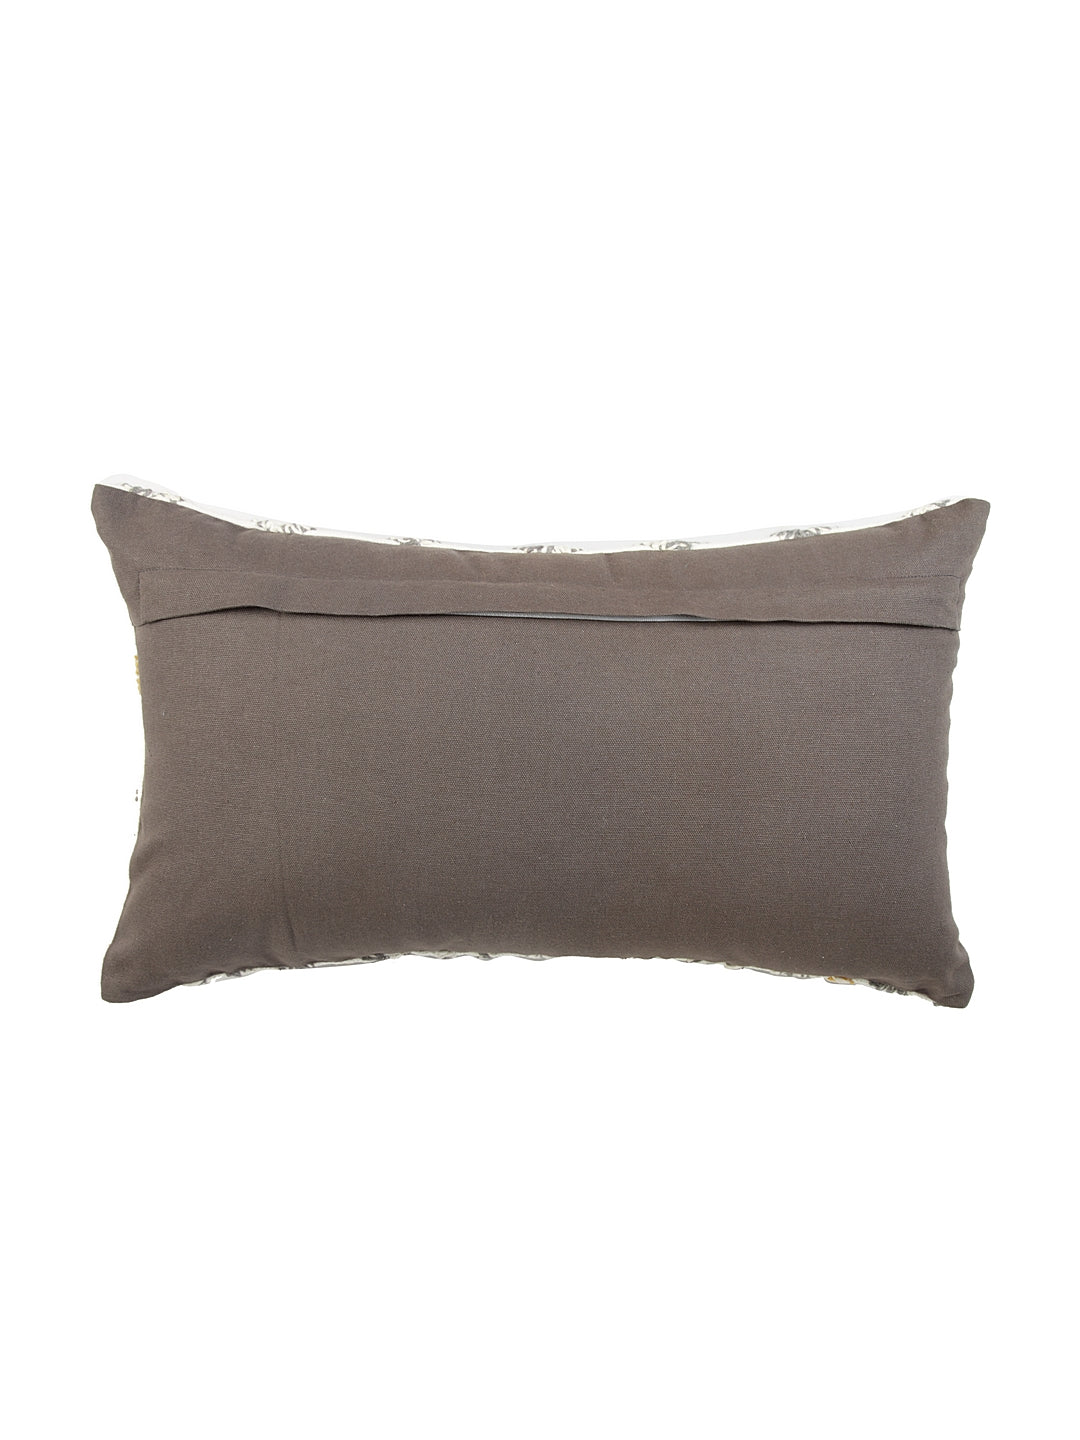 Blanc9 Geo Tribe Cushion Cover with Filler 30x50cm